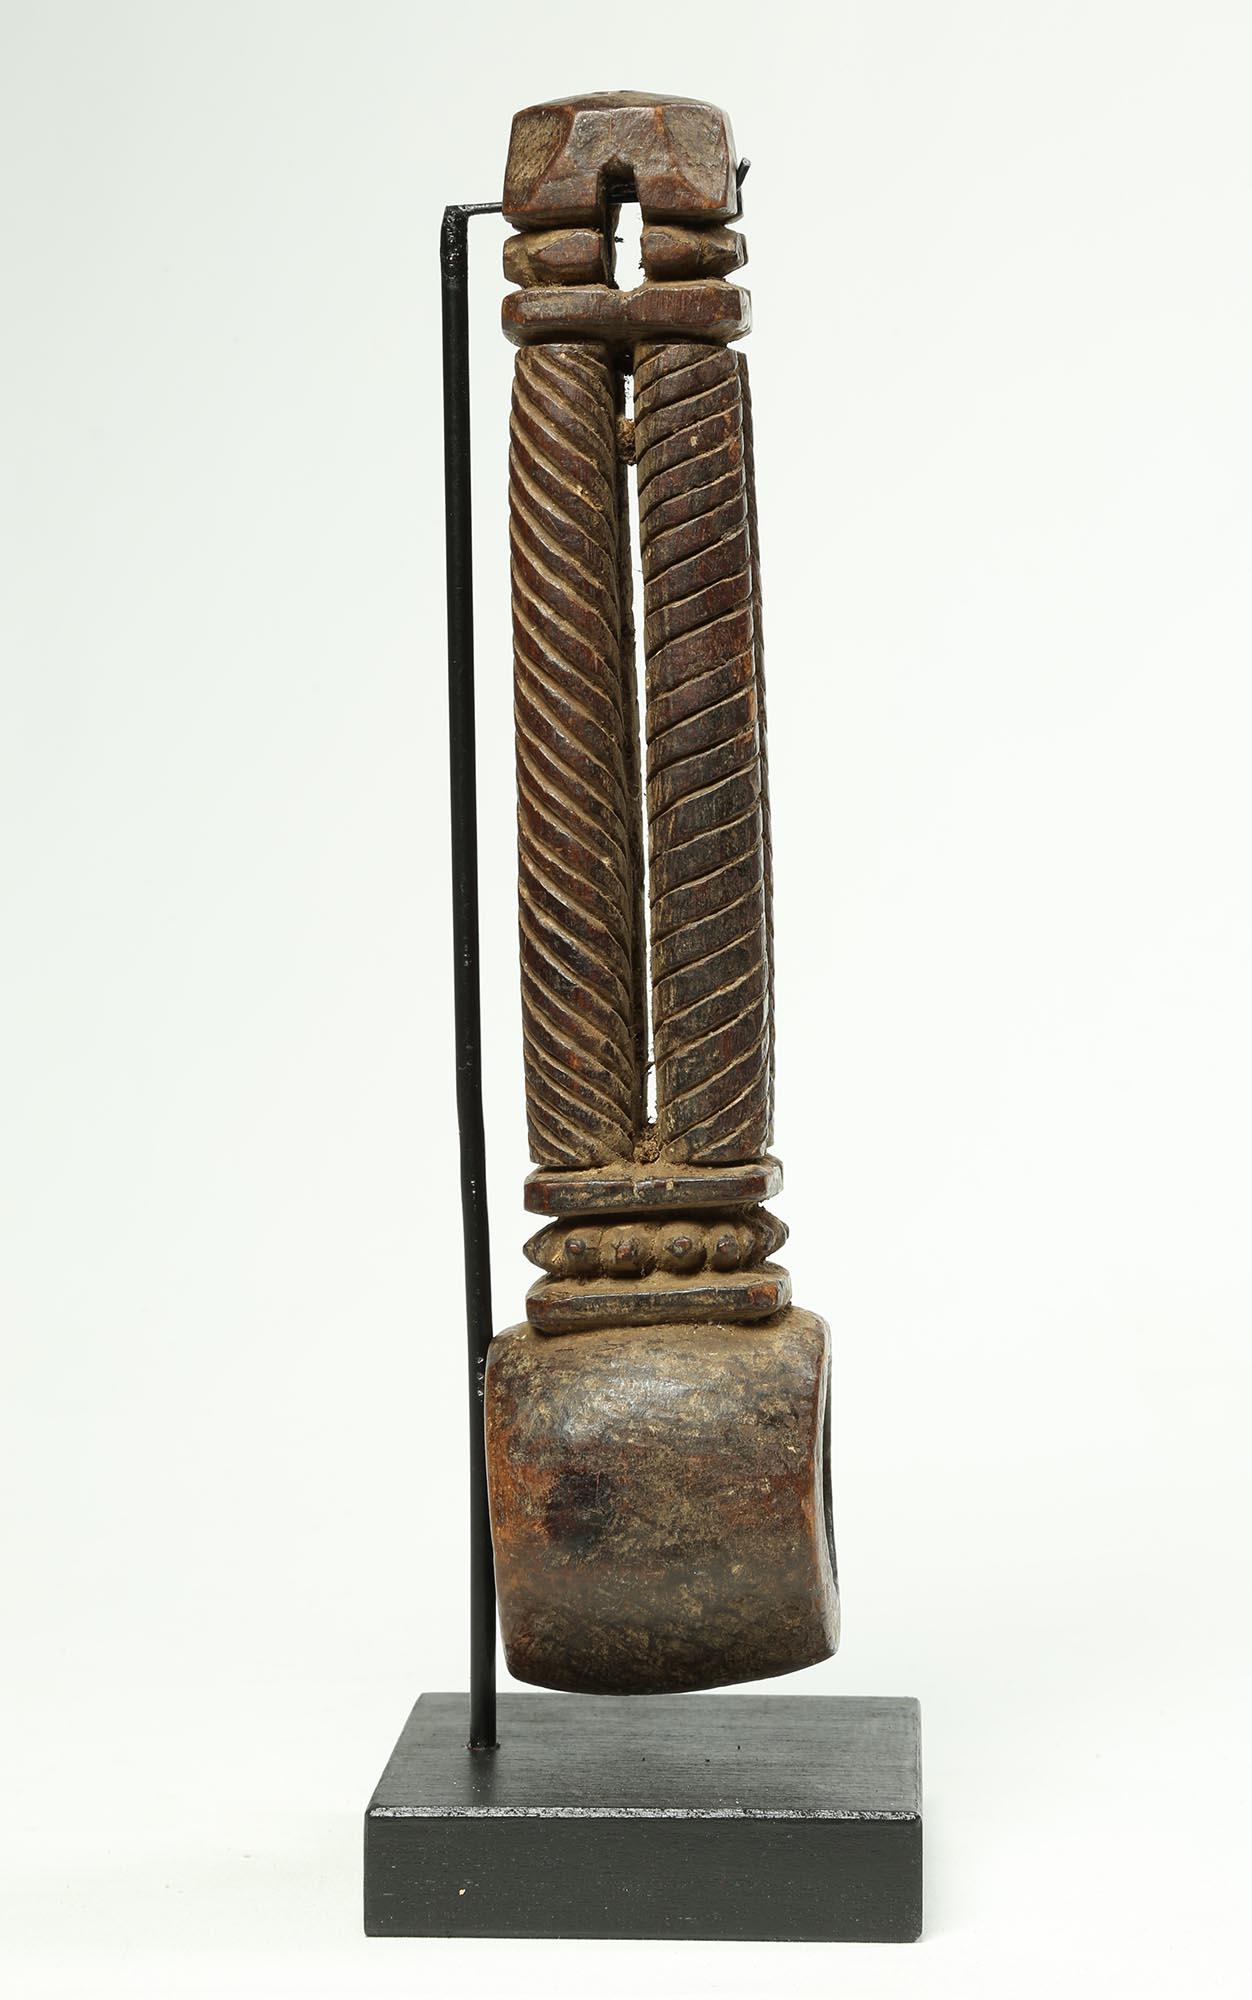 Nepalese Nepal Himalayan Butter Churn Handle, Early 20th Century with Columns